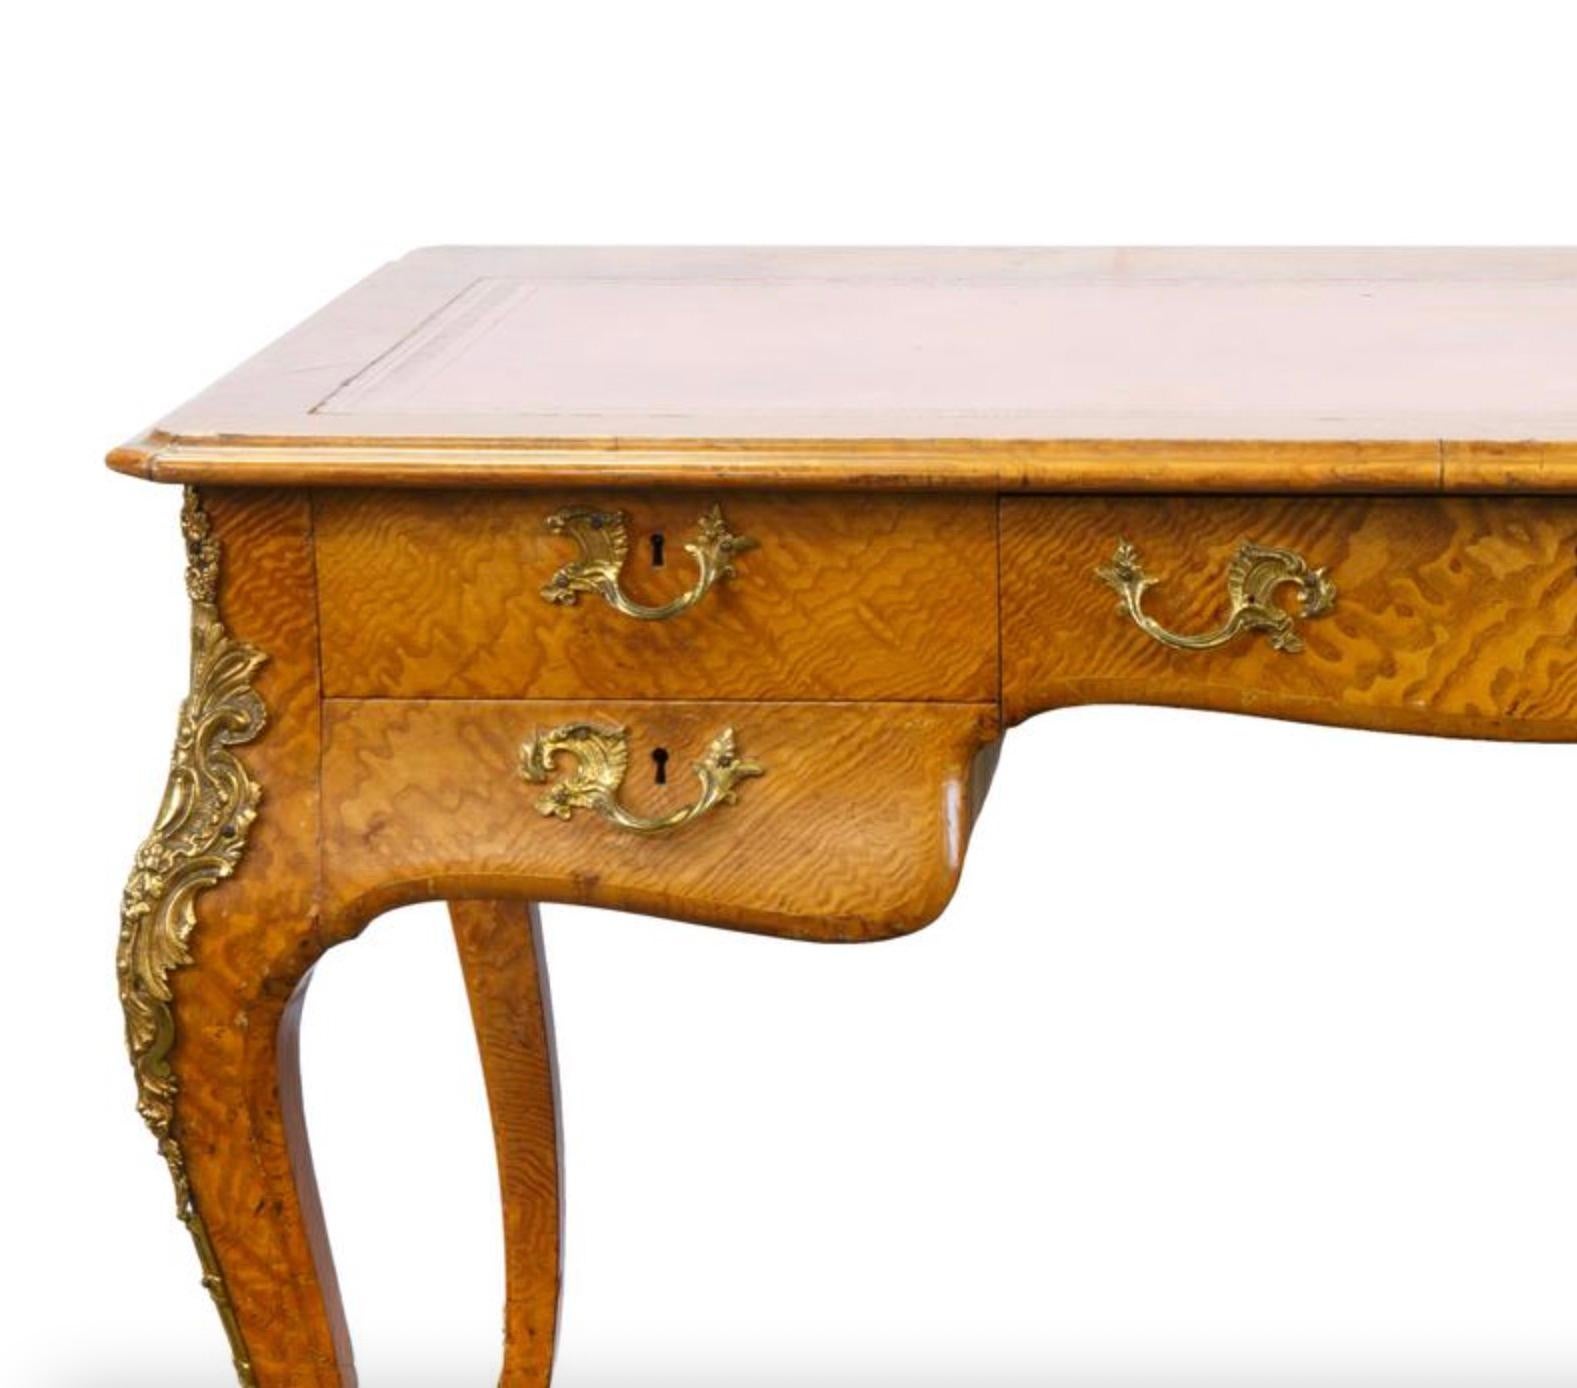 Elevate your study room / workspace with this Exquisite Howard and Sons Burl Walnut Lacquered Writing Desk, a masterpiece of design, craftsmanship, and fine details. The burl walnut wood and gilt bronze floral decorations create a sense of